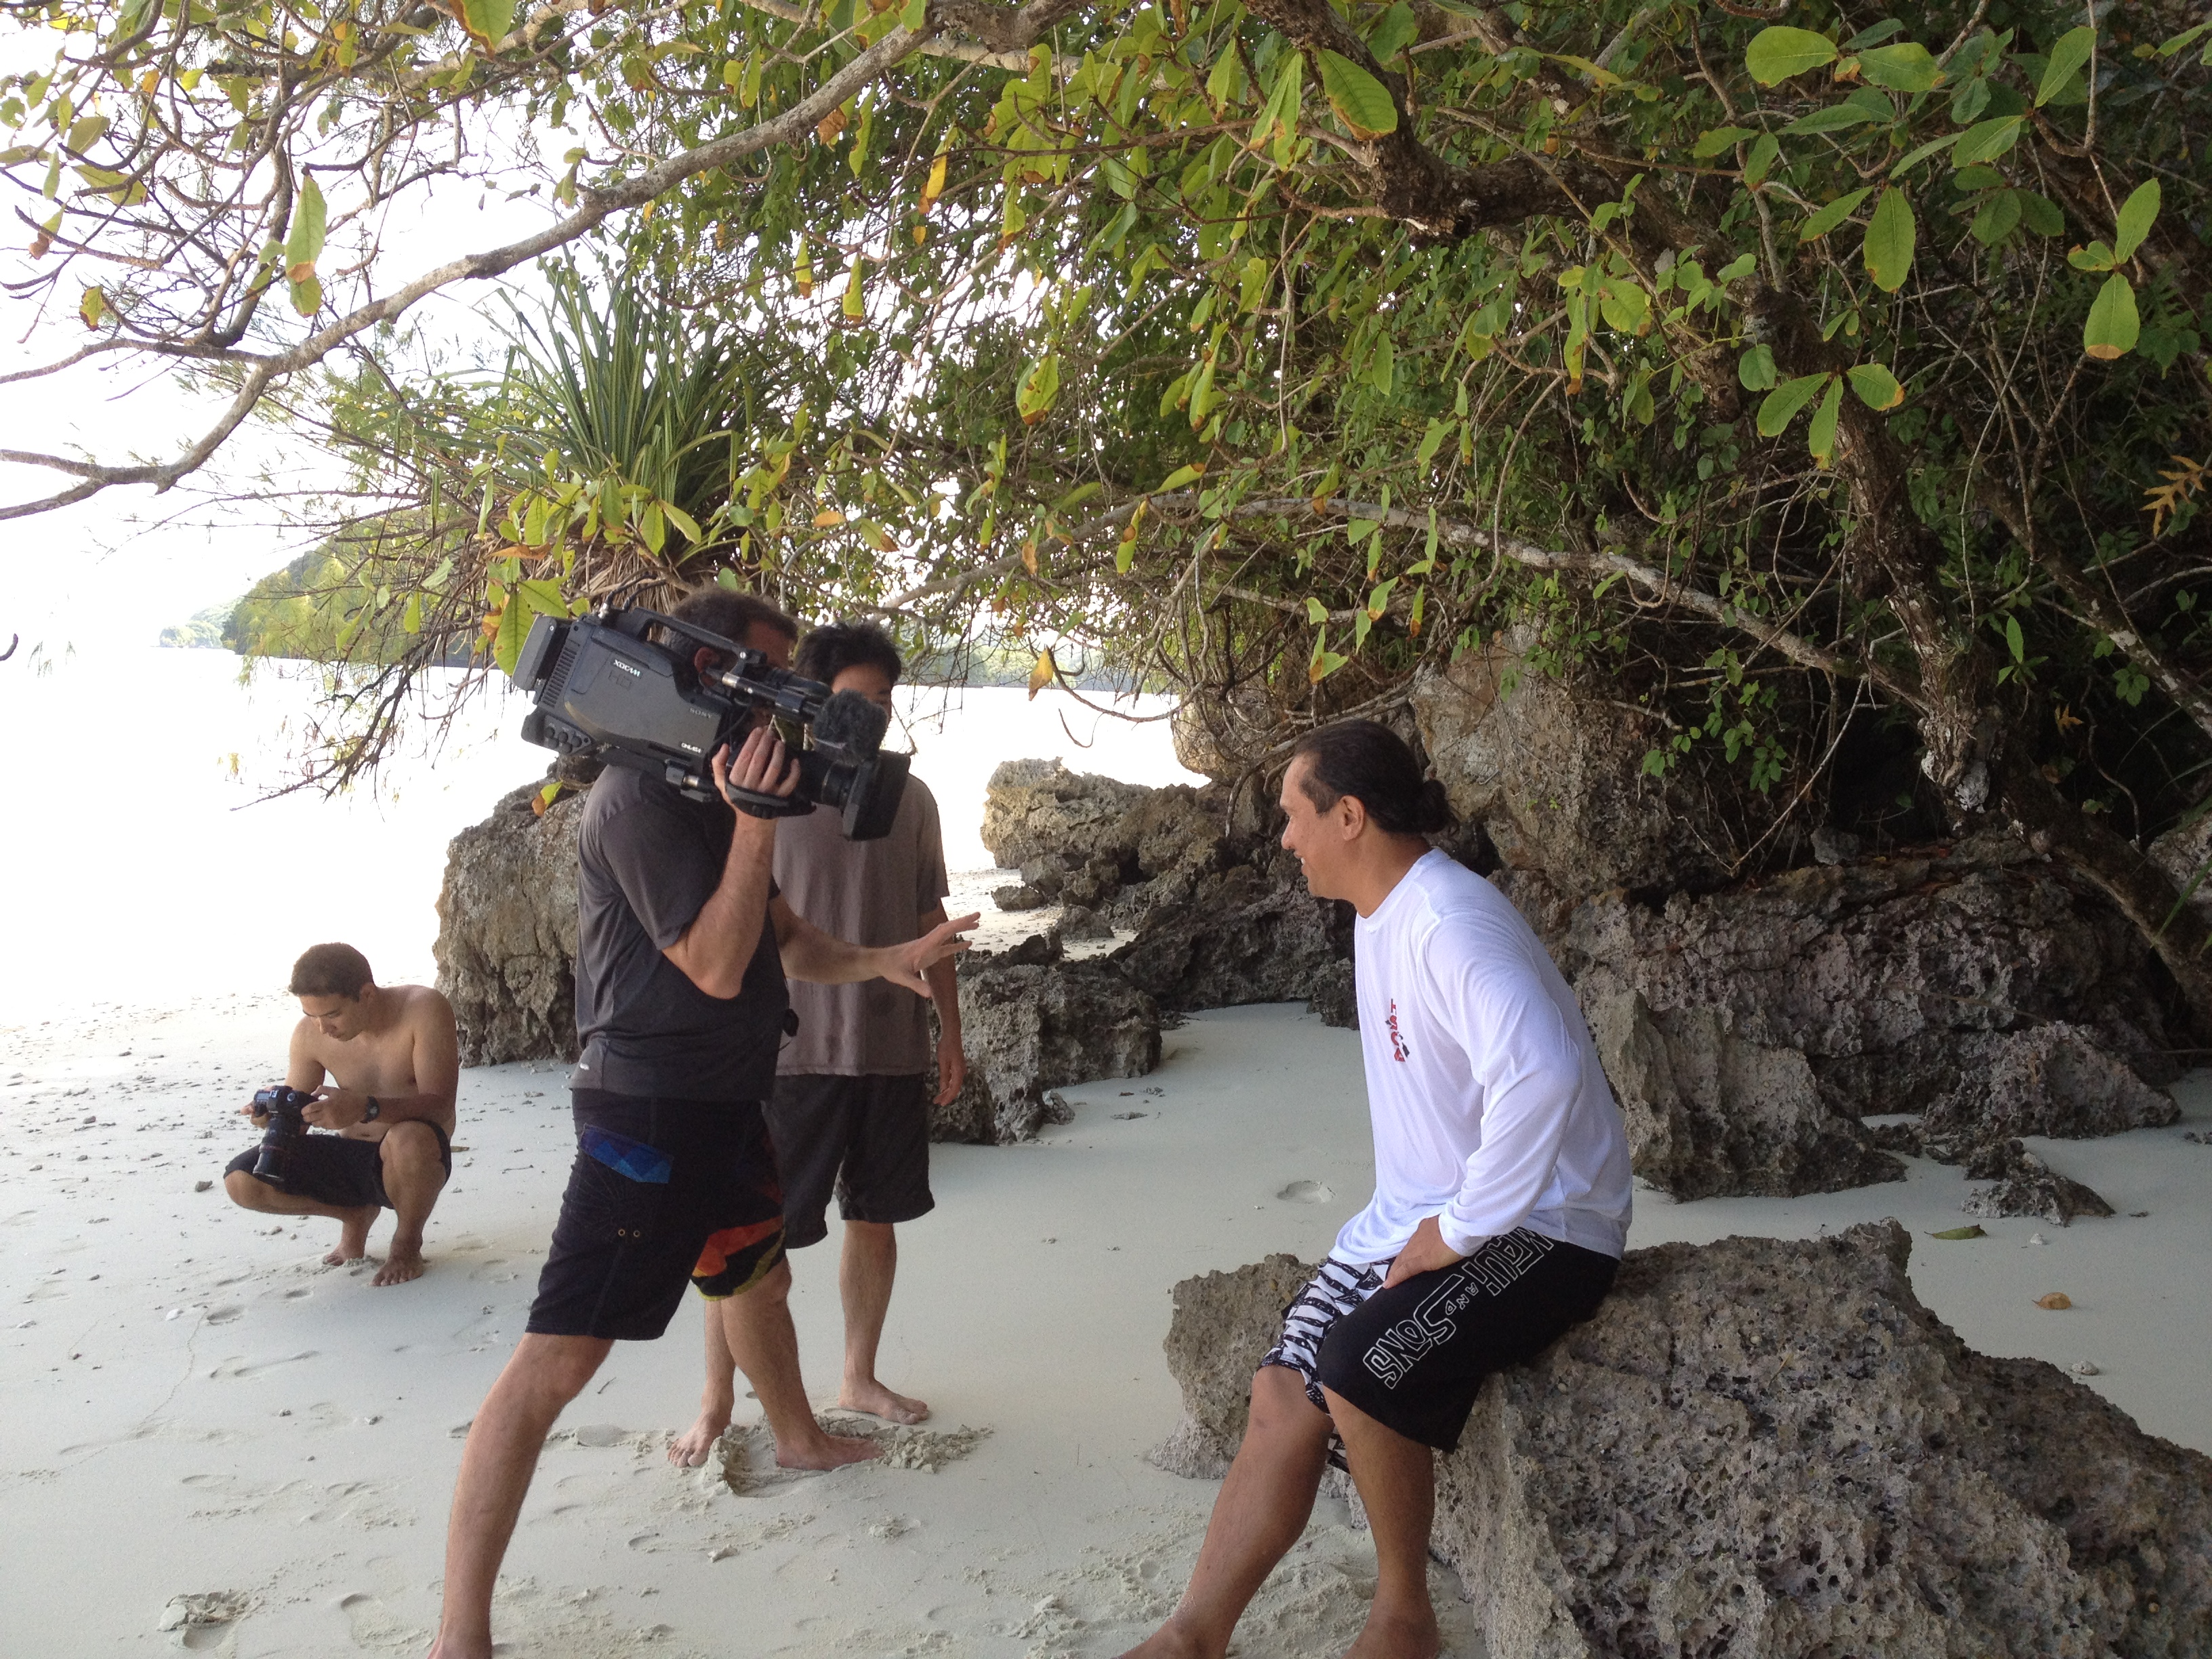 Interview on the beach in Palau, Micronesia. Photo © TNC